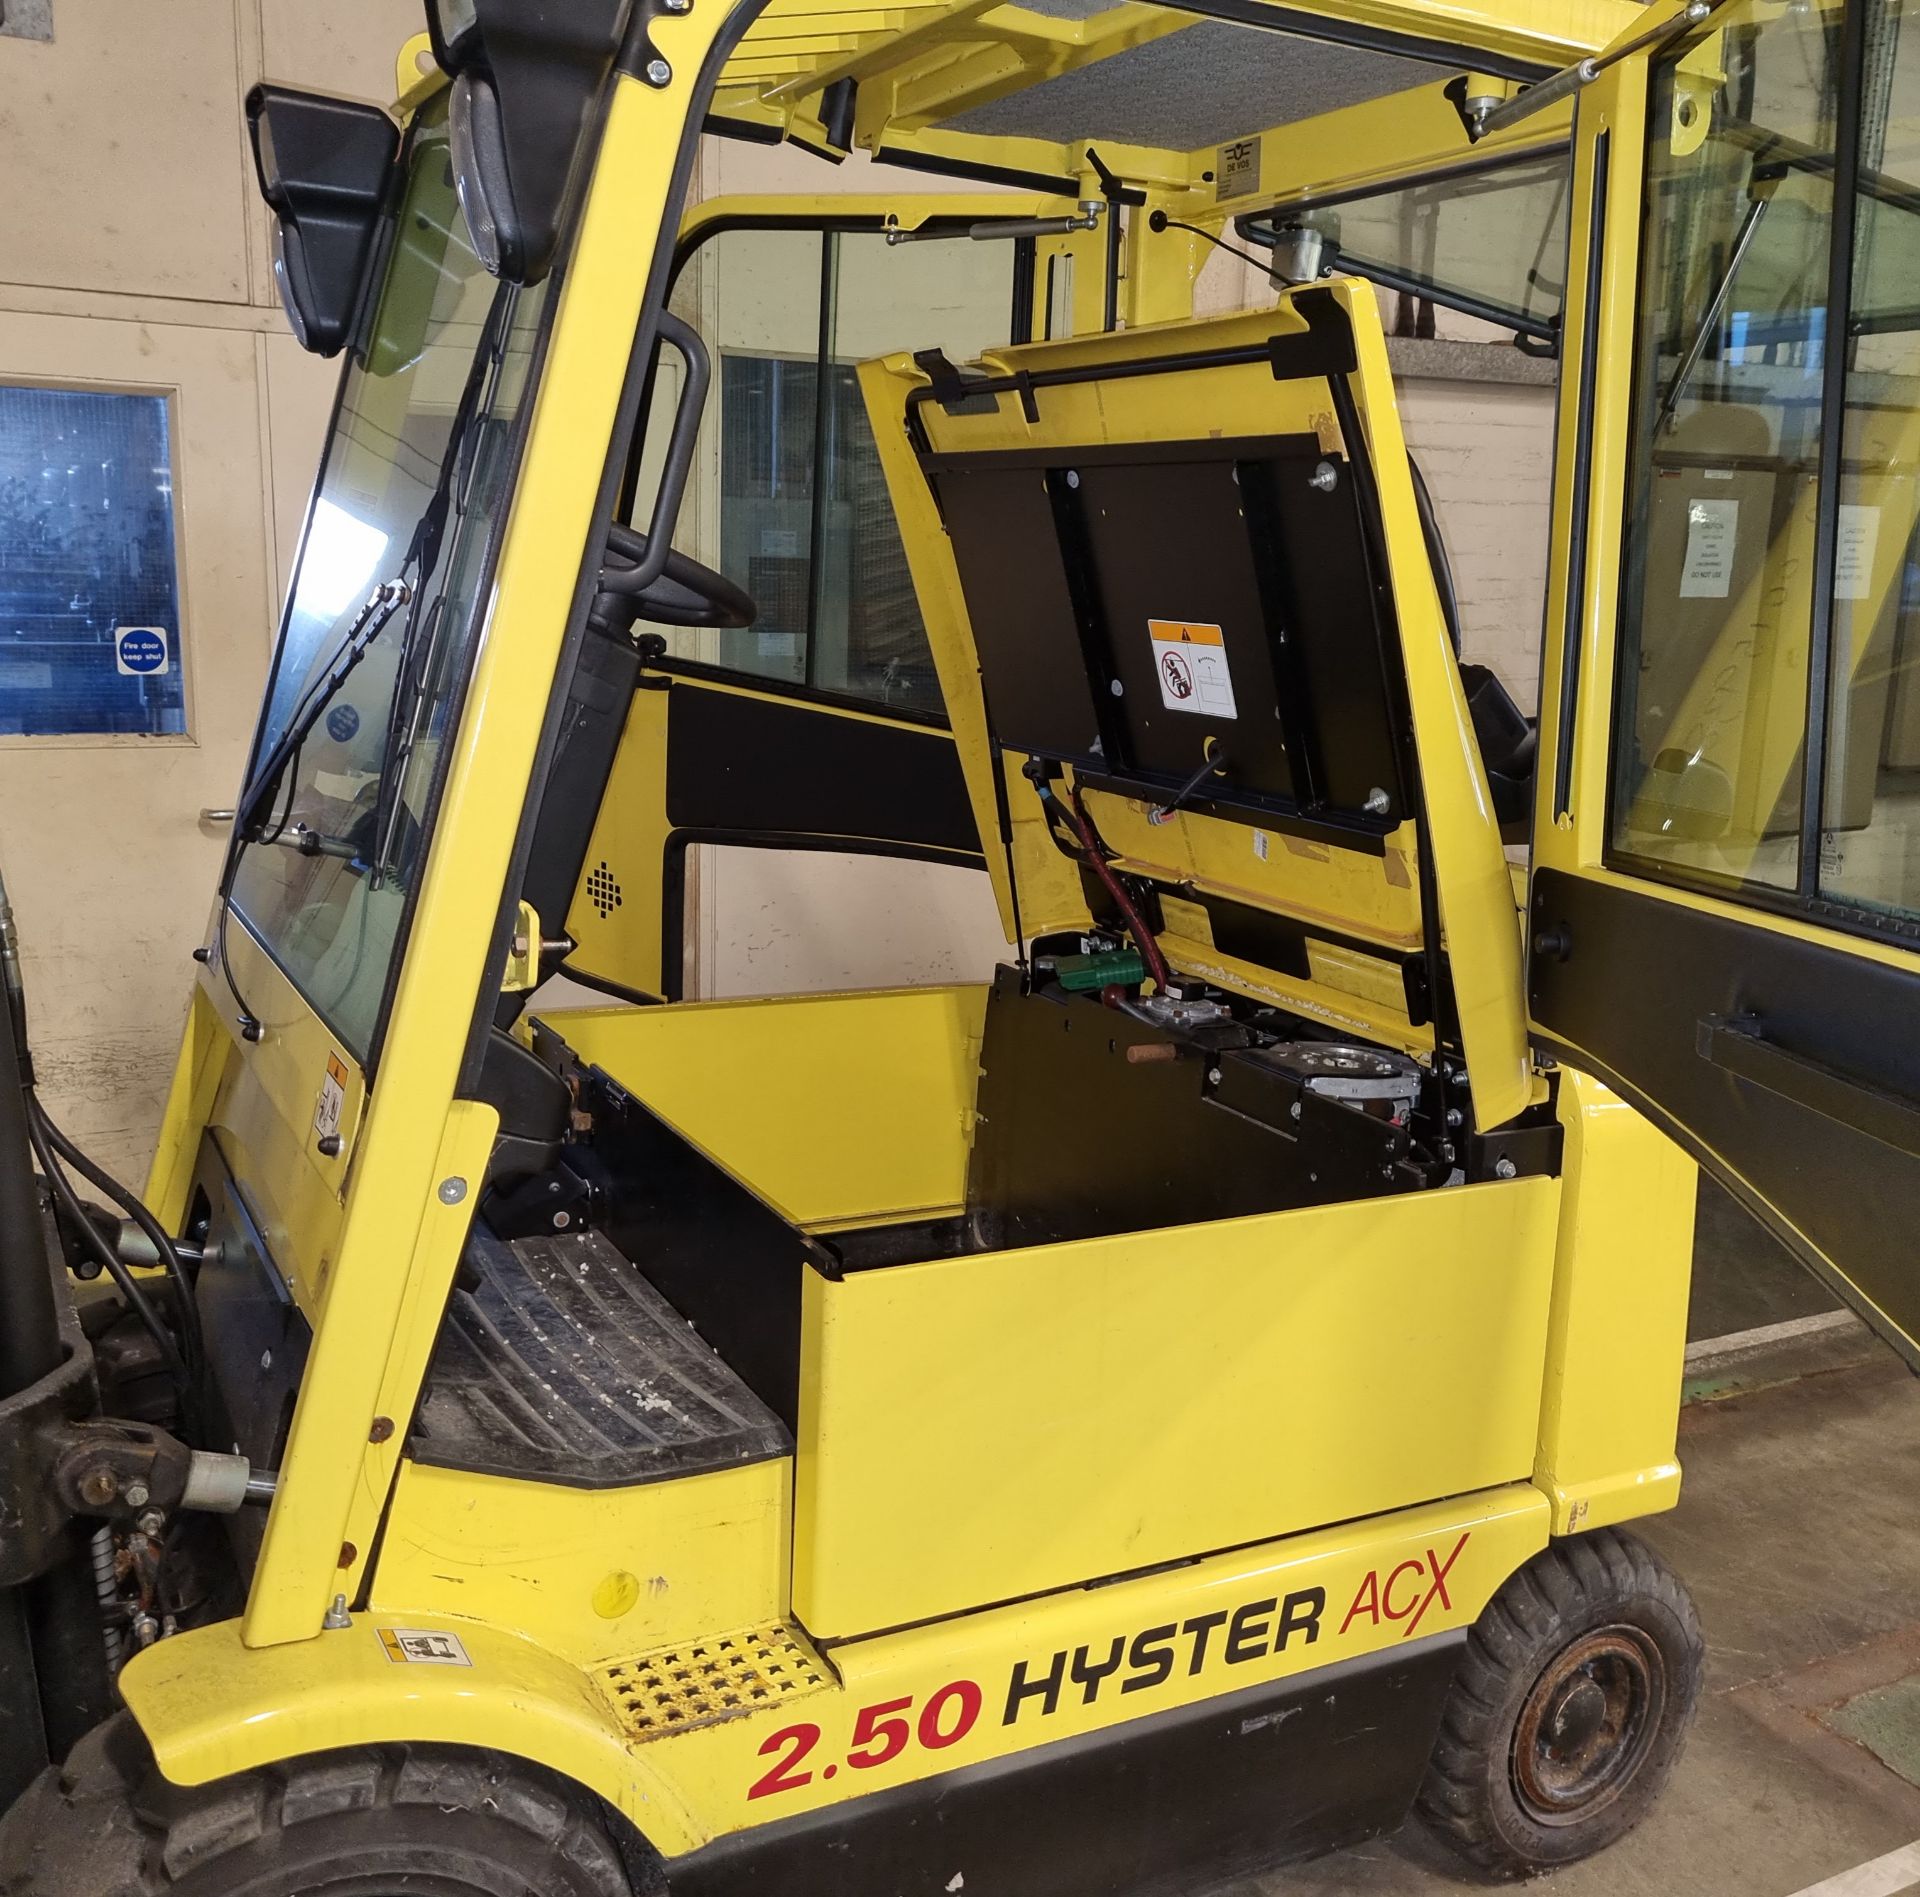 Hyster ACX J2.50XM-717 4-wheel electric forklift truck - full details in the description - Image 17 of 21